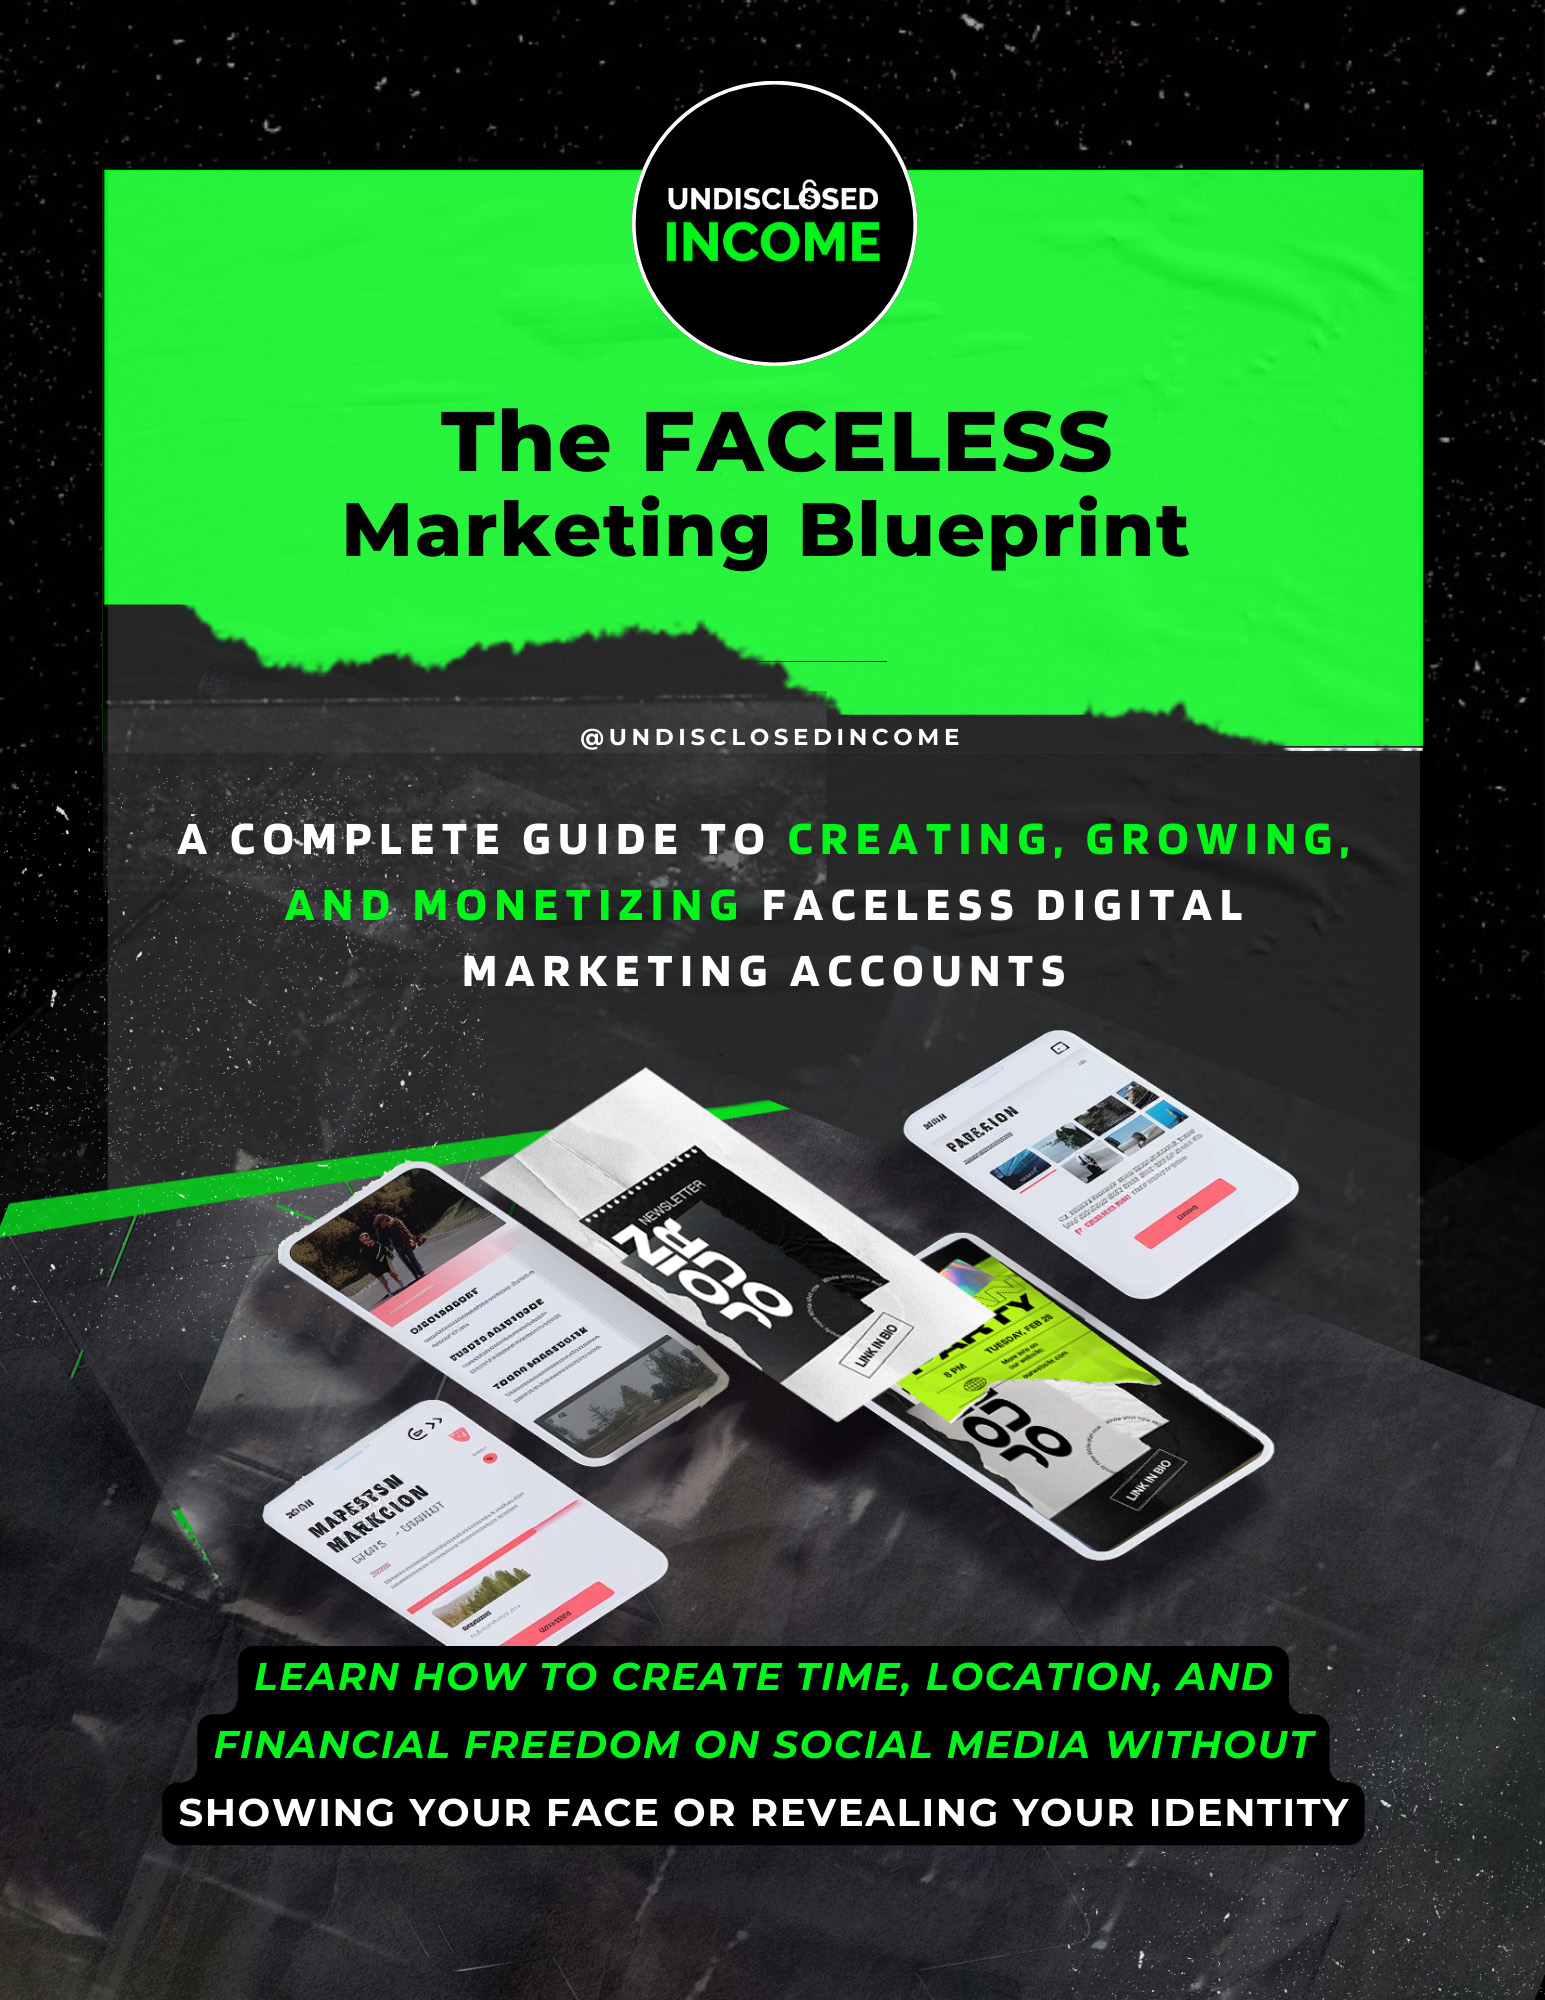 UNDISCLOSED INCOME, The Faceless Marketing Blueprint